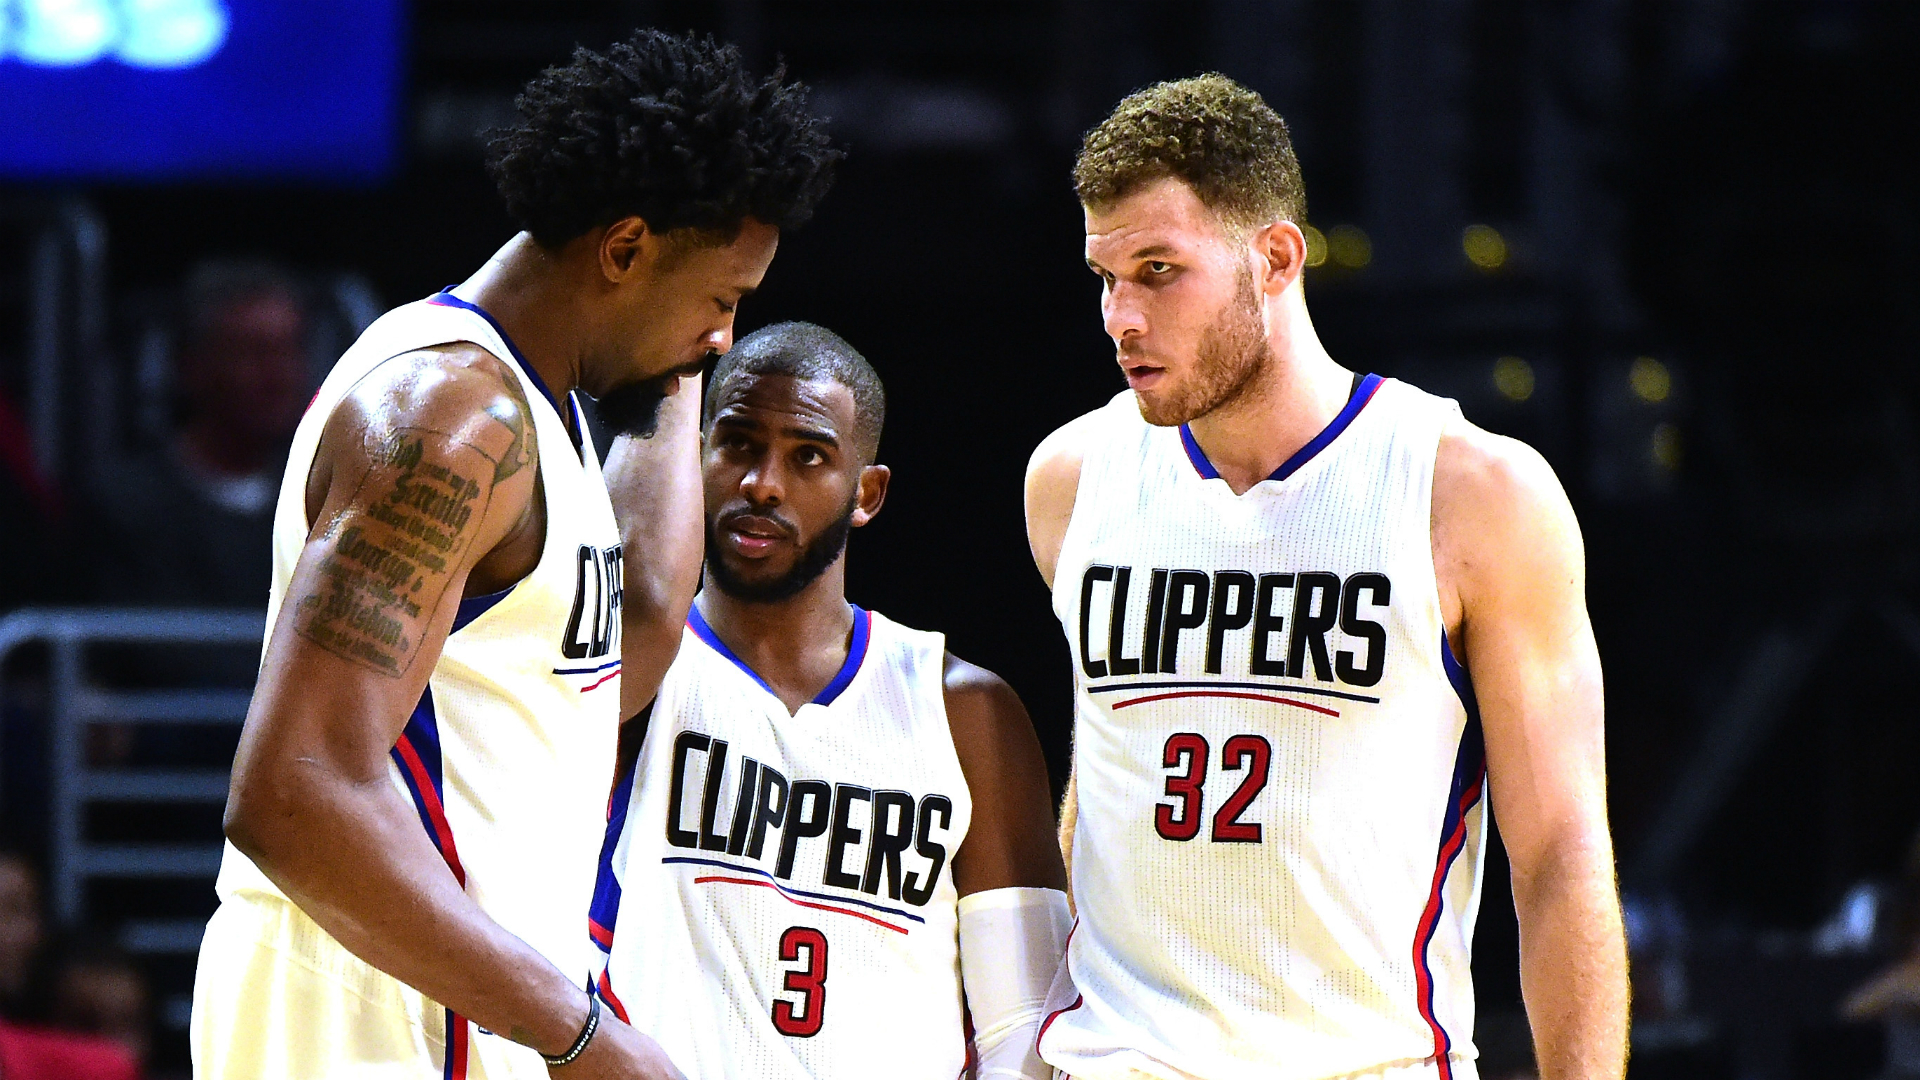 Clippers probably can't afford to get any better than they are now | NBA | Sporting News